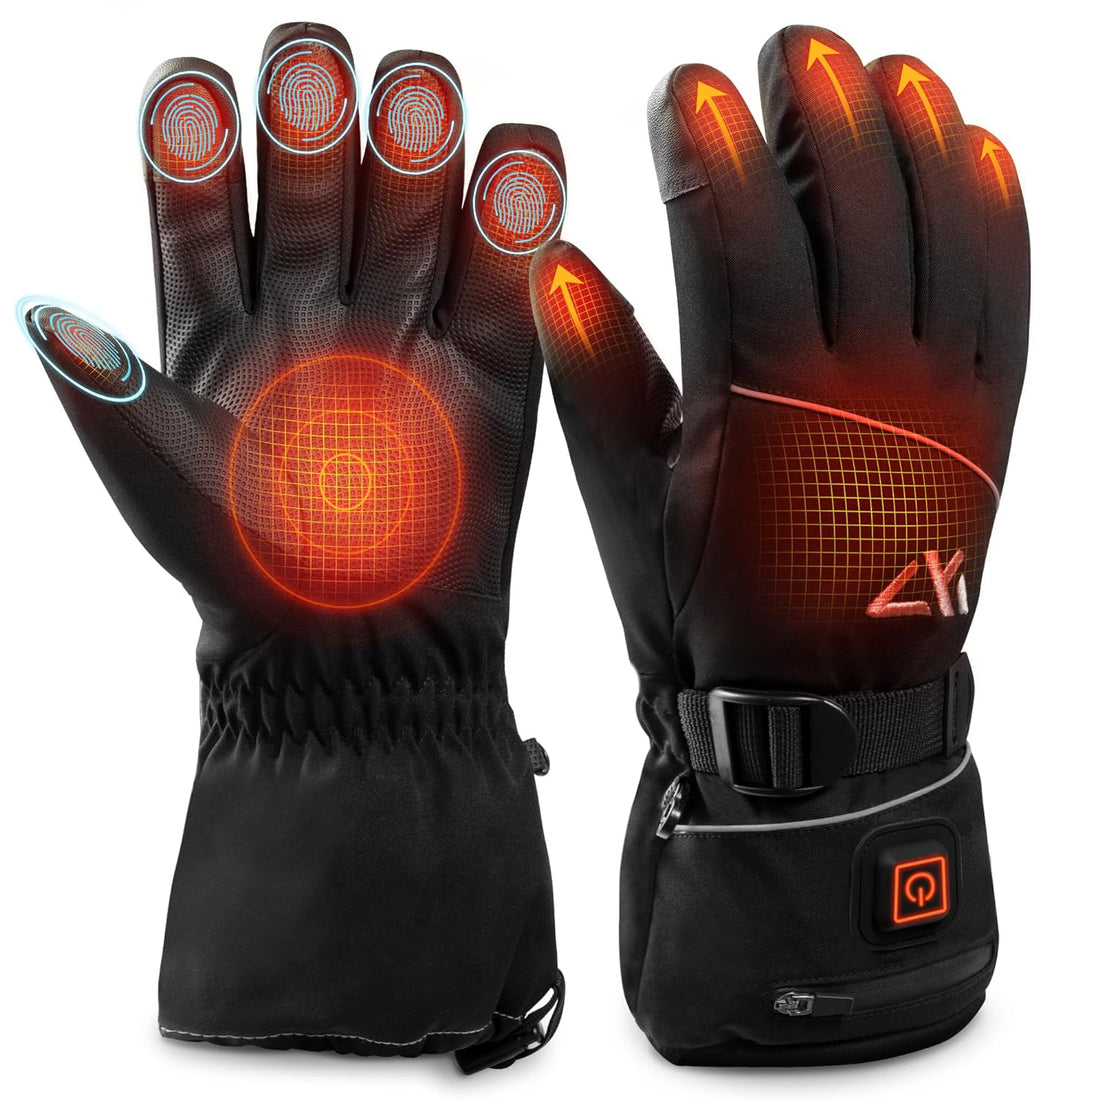 AKASO Heated Gloves for Men Women, Electric Heated Ski Gloves with 3 Heating Modes, Thermal Insulation Winter with Rechargeable Battery-Overheating Protection- Best Gift